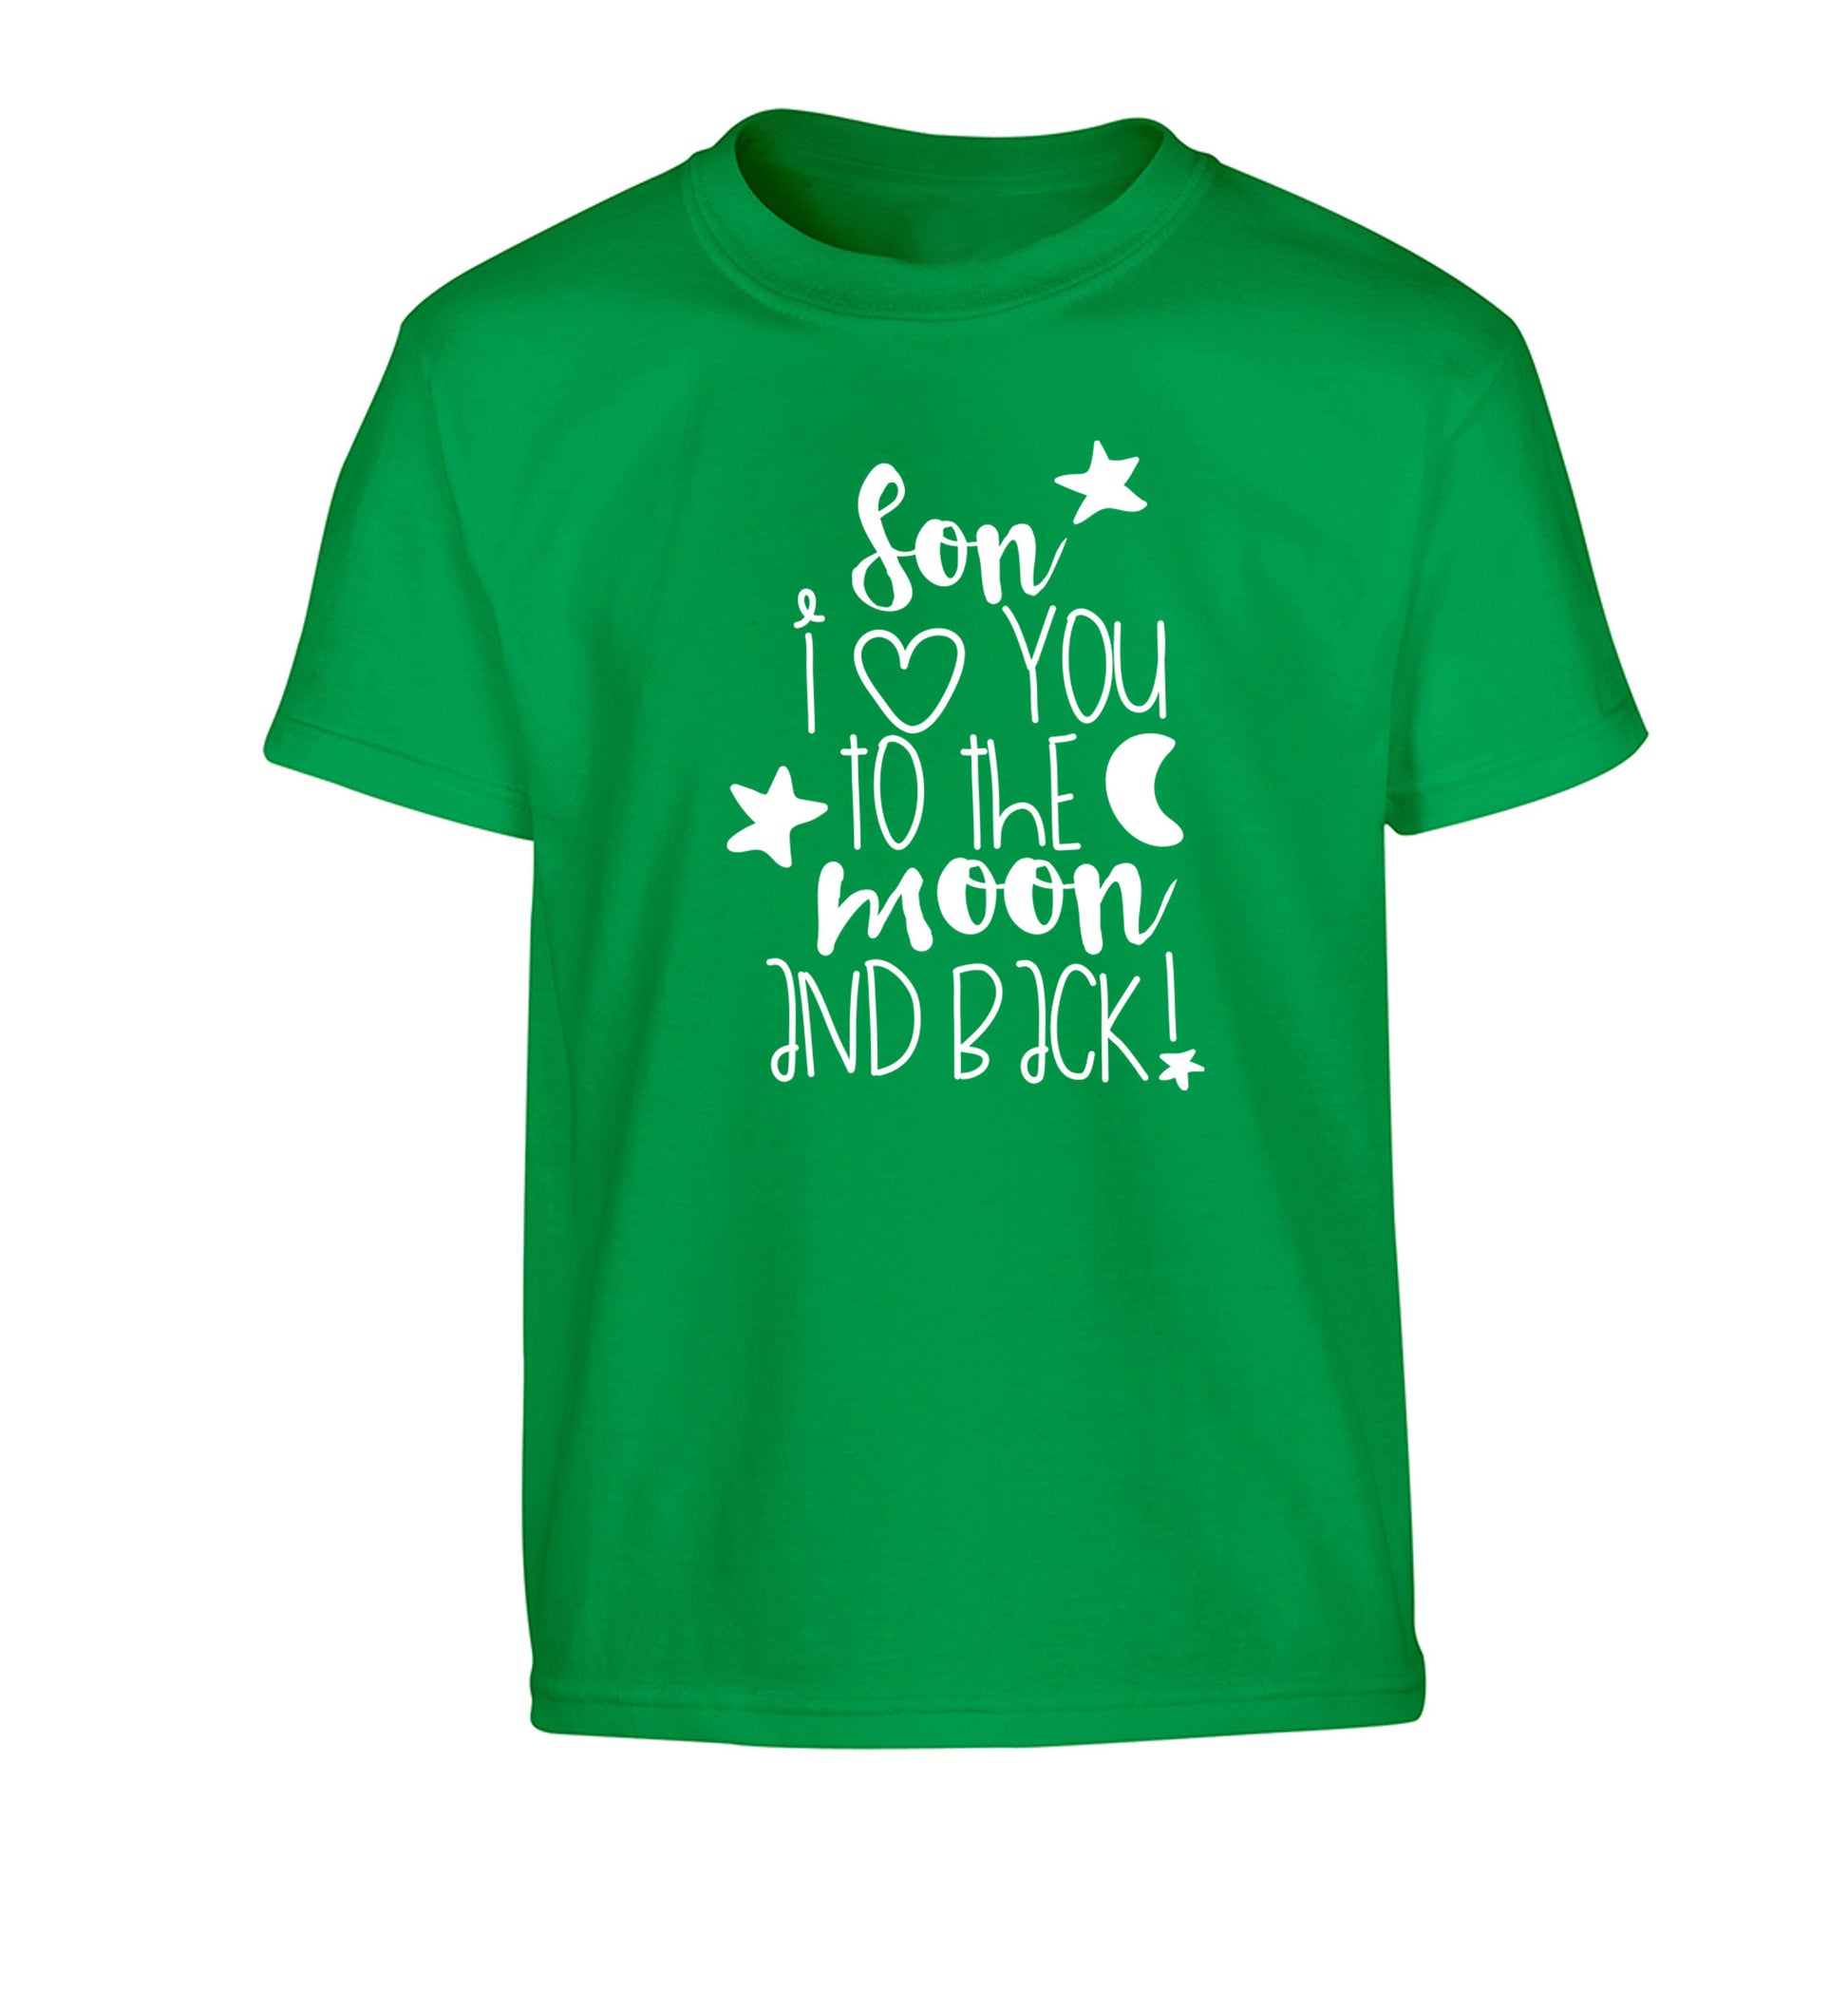 Son I love you to the moon and back Children's green Tshirt 12-14 Years